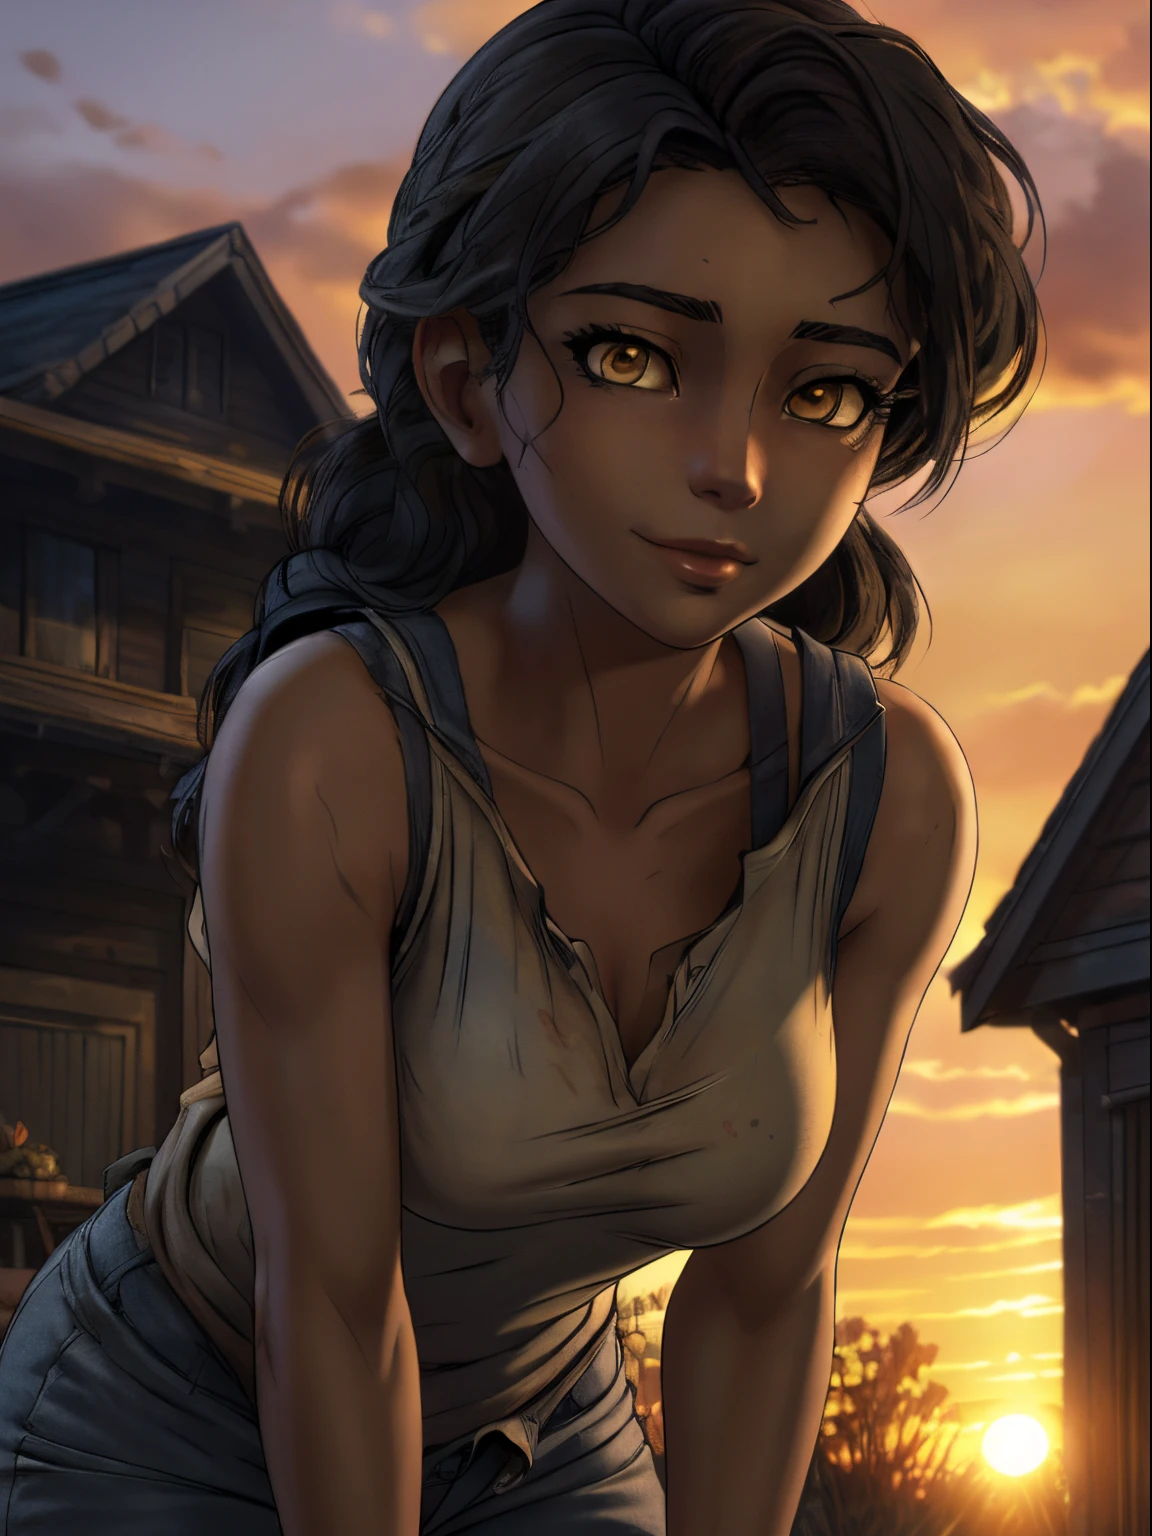 ((ultra quality)), ((tmasterpiece)), Clementine from the walking dead, ((Black, hairlong)) (Beautiful cute face), (beautiful female lips), Charming, ((aroused expression)), looks at the camera with a gentle smile, eyes are slightly closed, (skin color dark), Body glare, ((detailed beautiful female eyes)), ((dark yellow eyes)), (juicy female lips), (beautiful female hands), ((perfect female figure)), perfect female body, Beautiful waist, gorgeous big thighs, beautiful breasts, ((Subtle and beautiful)), stands, (close-up of the face), (wearing blue jeans, gray sleeveless tank) background: country house, backyard, evening, Beautiful sunset, ((Depth of field)), ((high quality clear image)), (crisp details), ((higly detailed)), Realistic, Professional Photo Session, ((Clear Focus)), the anime